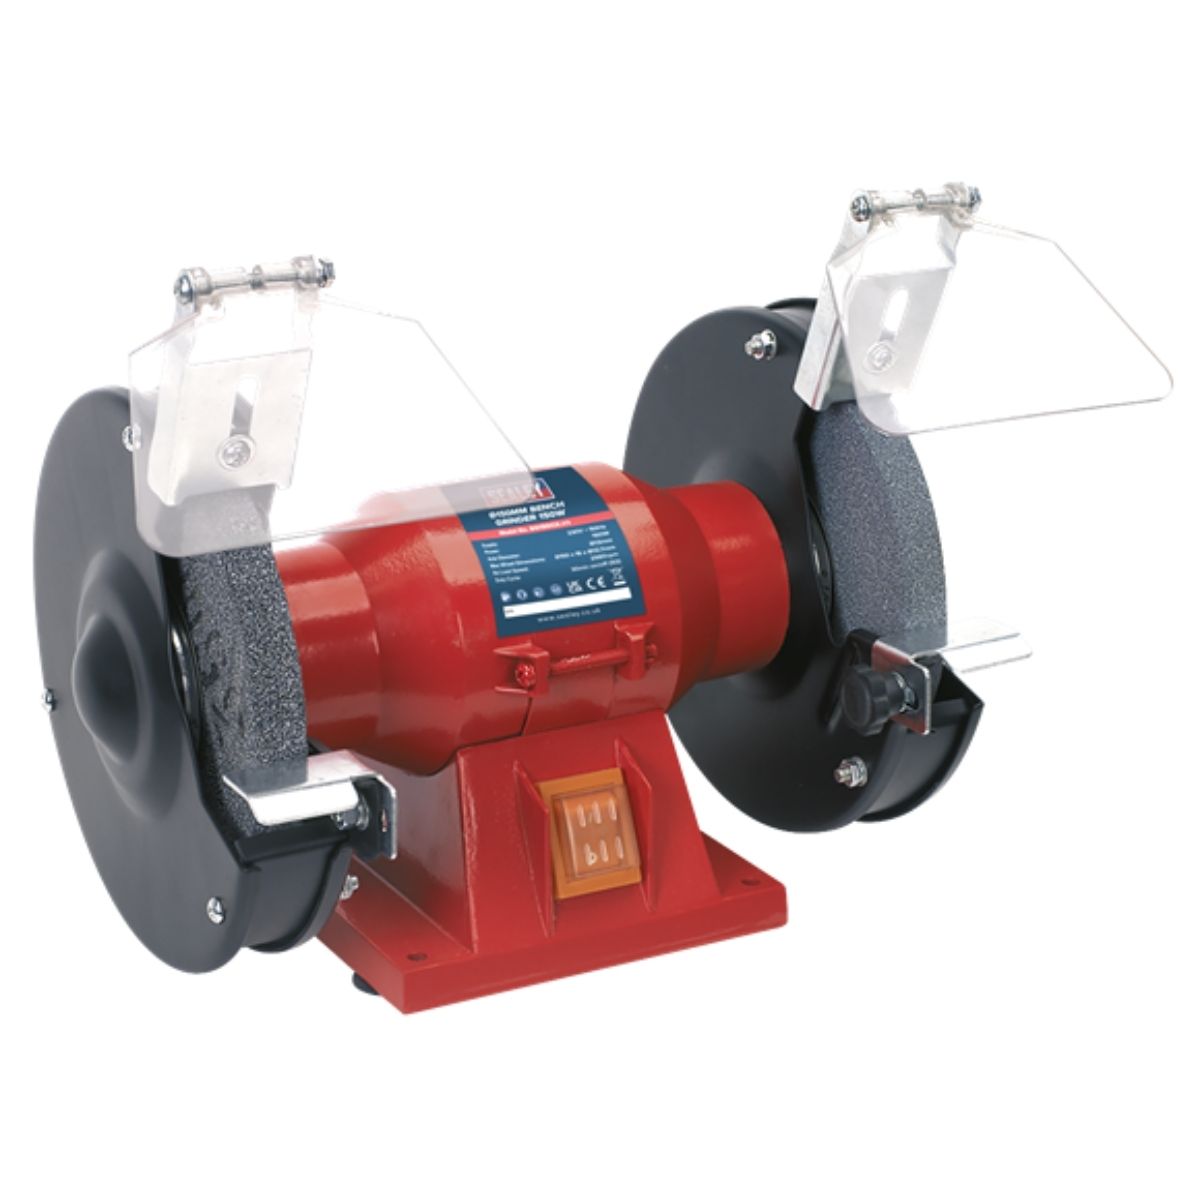 Sealey BGVDSCOMBO4 Bench Grinder & Vice Stand Deal